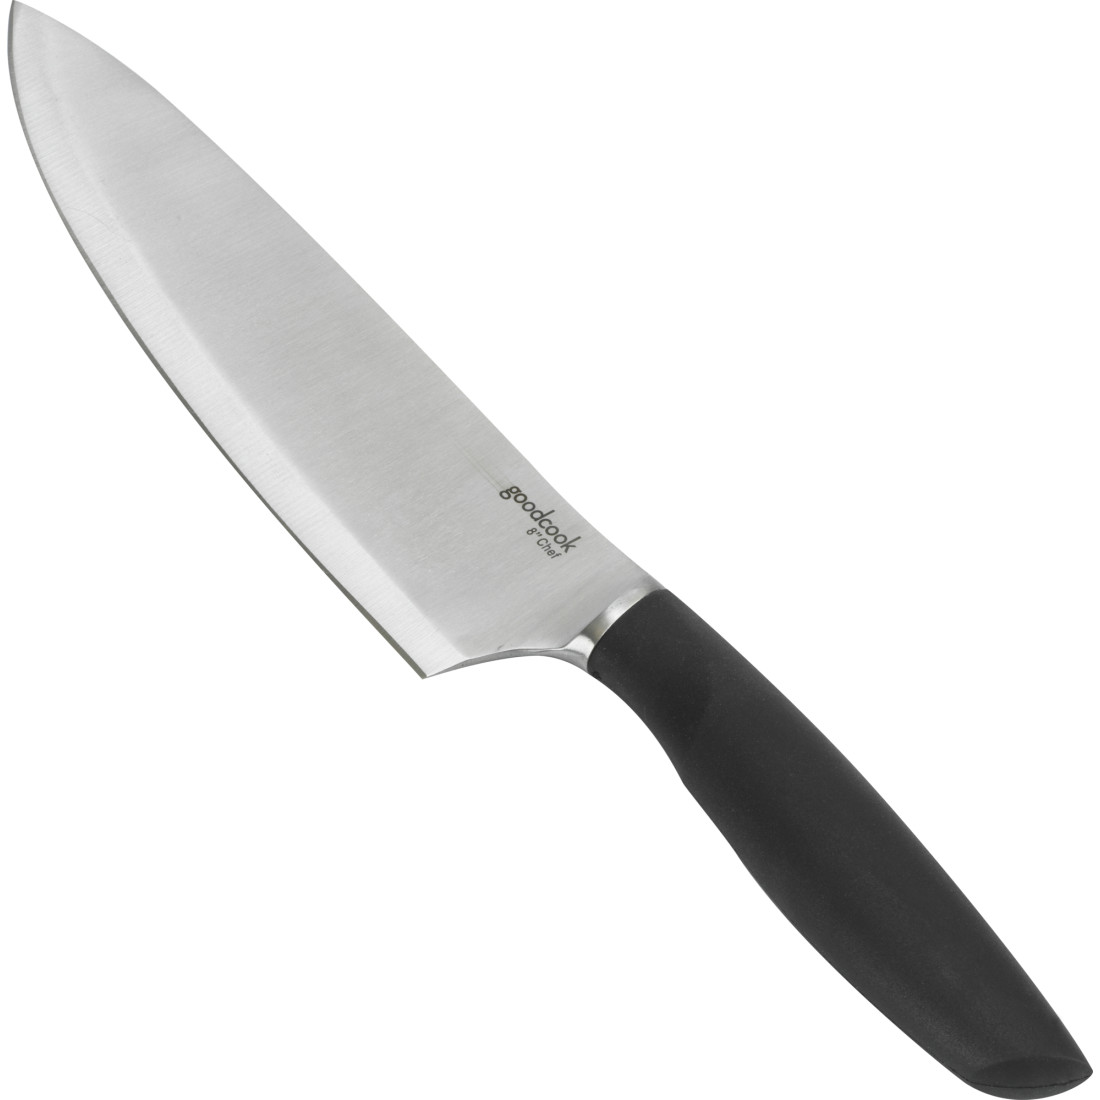 Save on Good Cook Cutlery Precision Chef's Knife 8 Inch Order